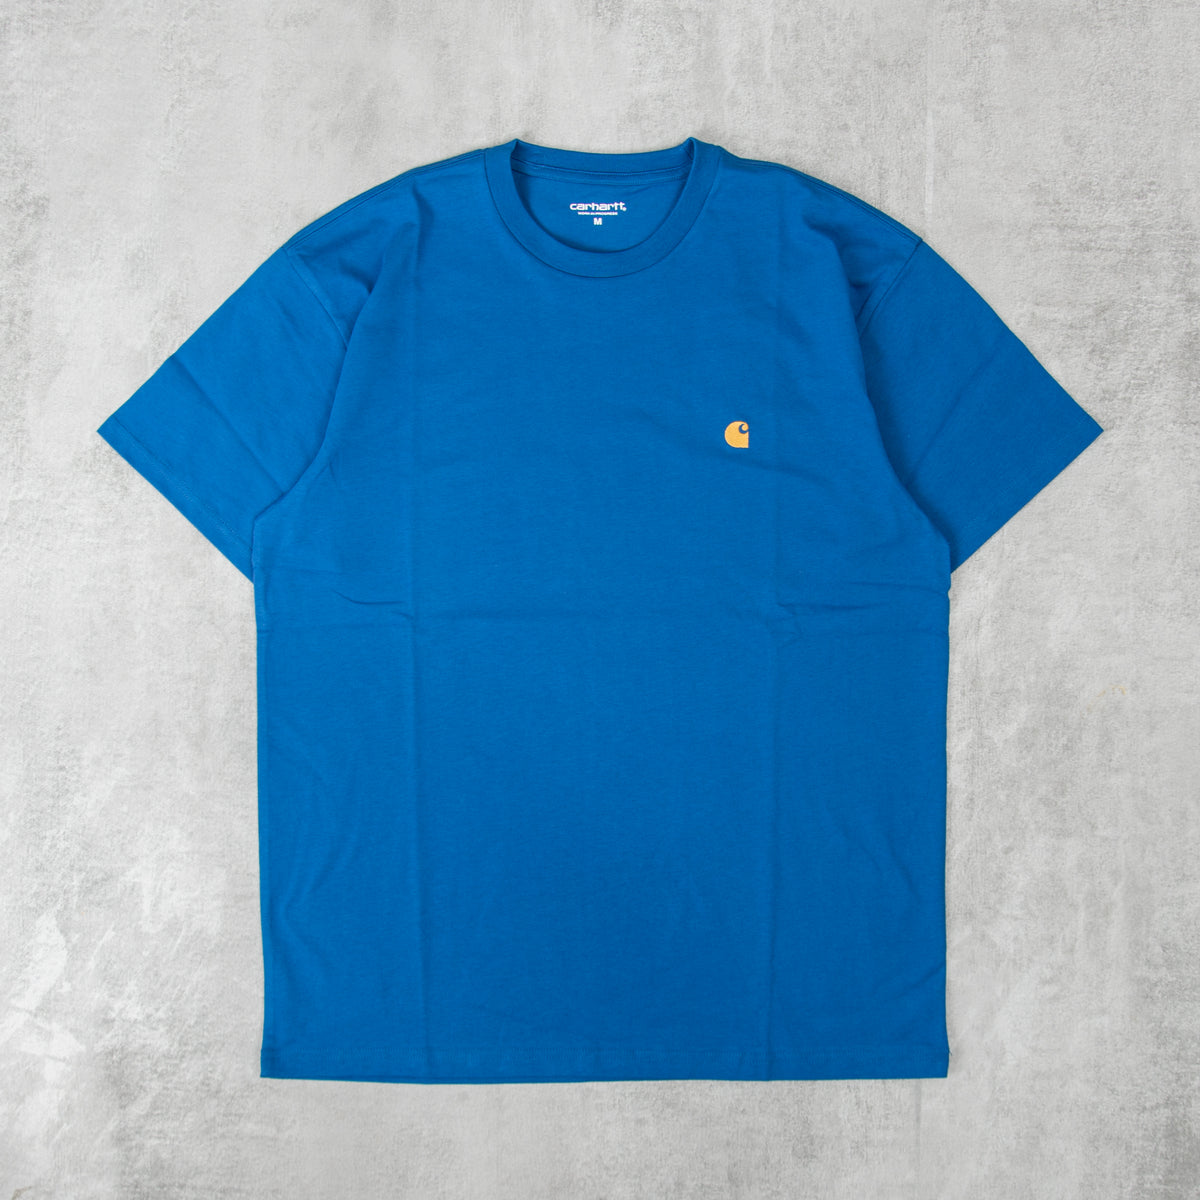 Purchase the Carhartt S/S Chase Tee - Acapulco@ Union Clothing